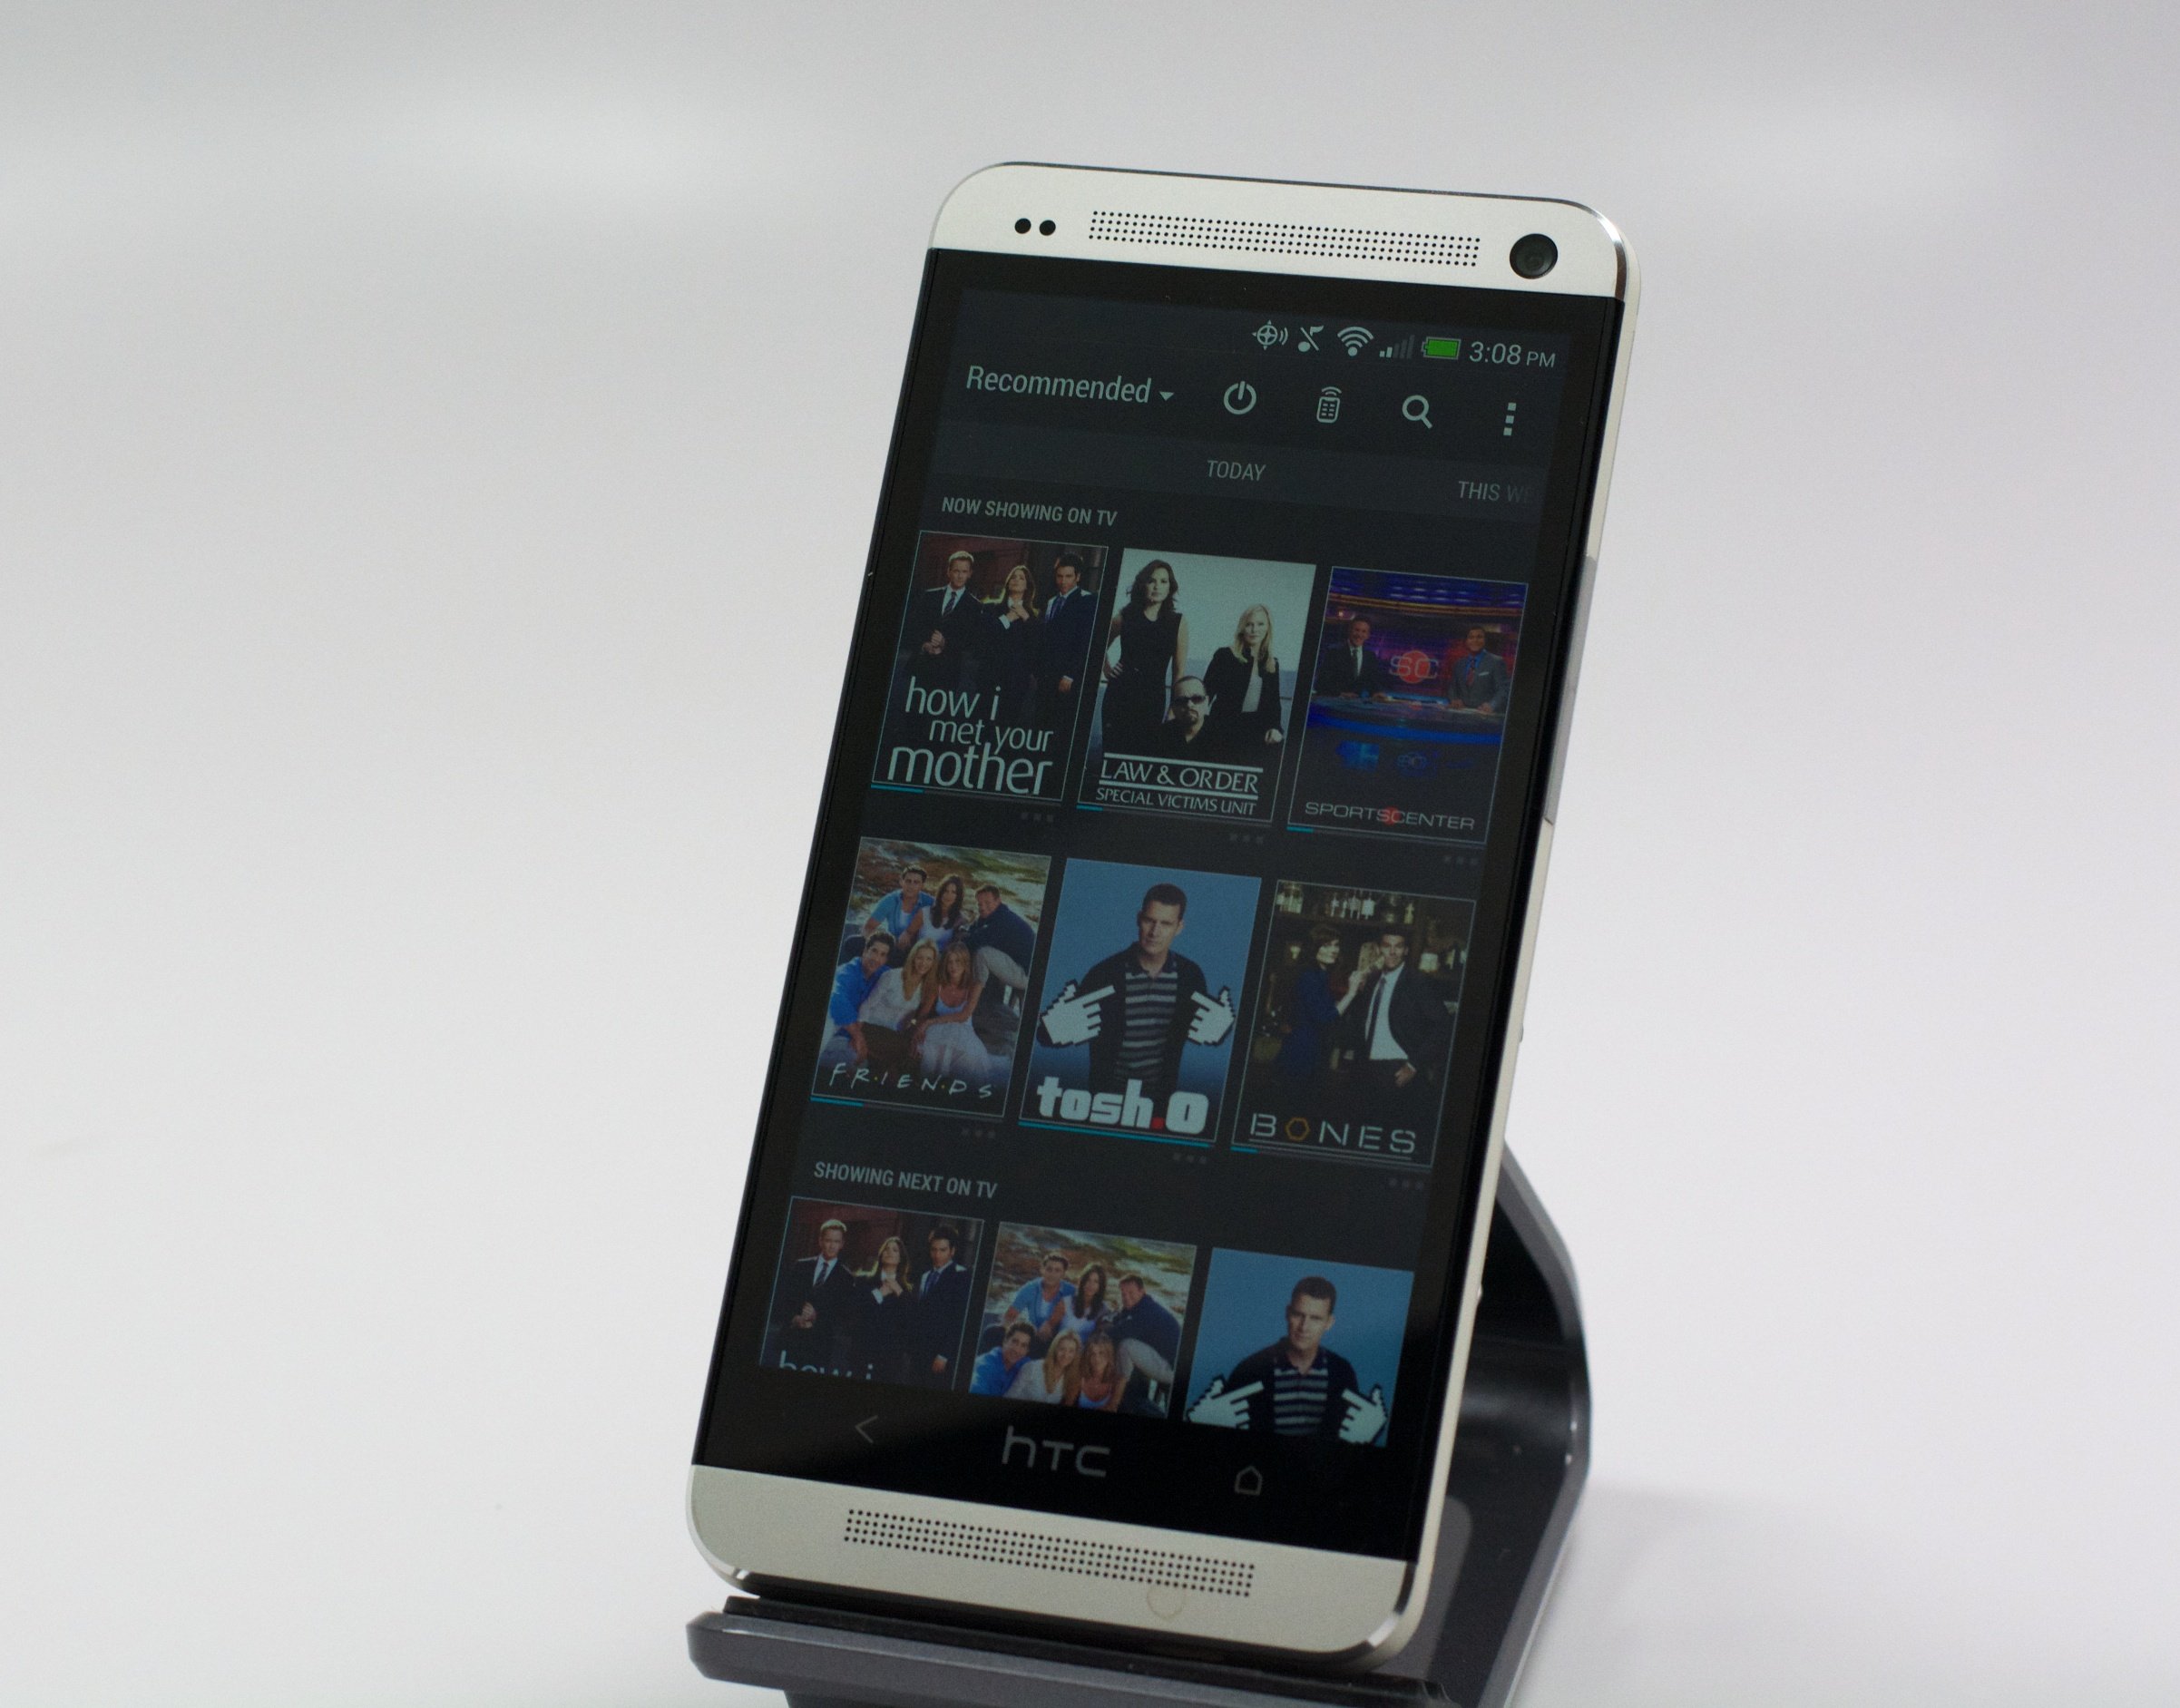 The Verizon HTC One can act as a remote control for your home theater.